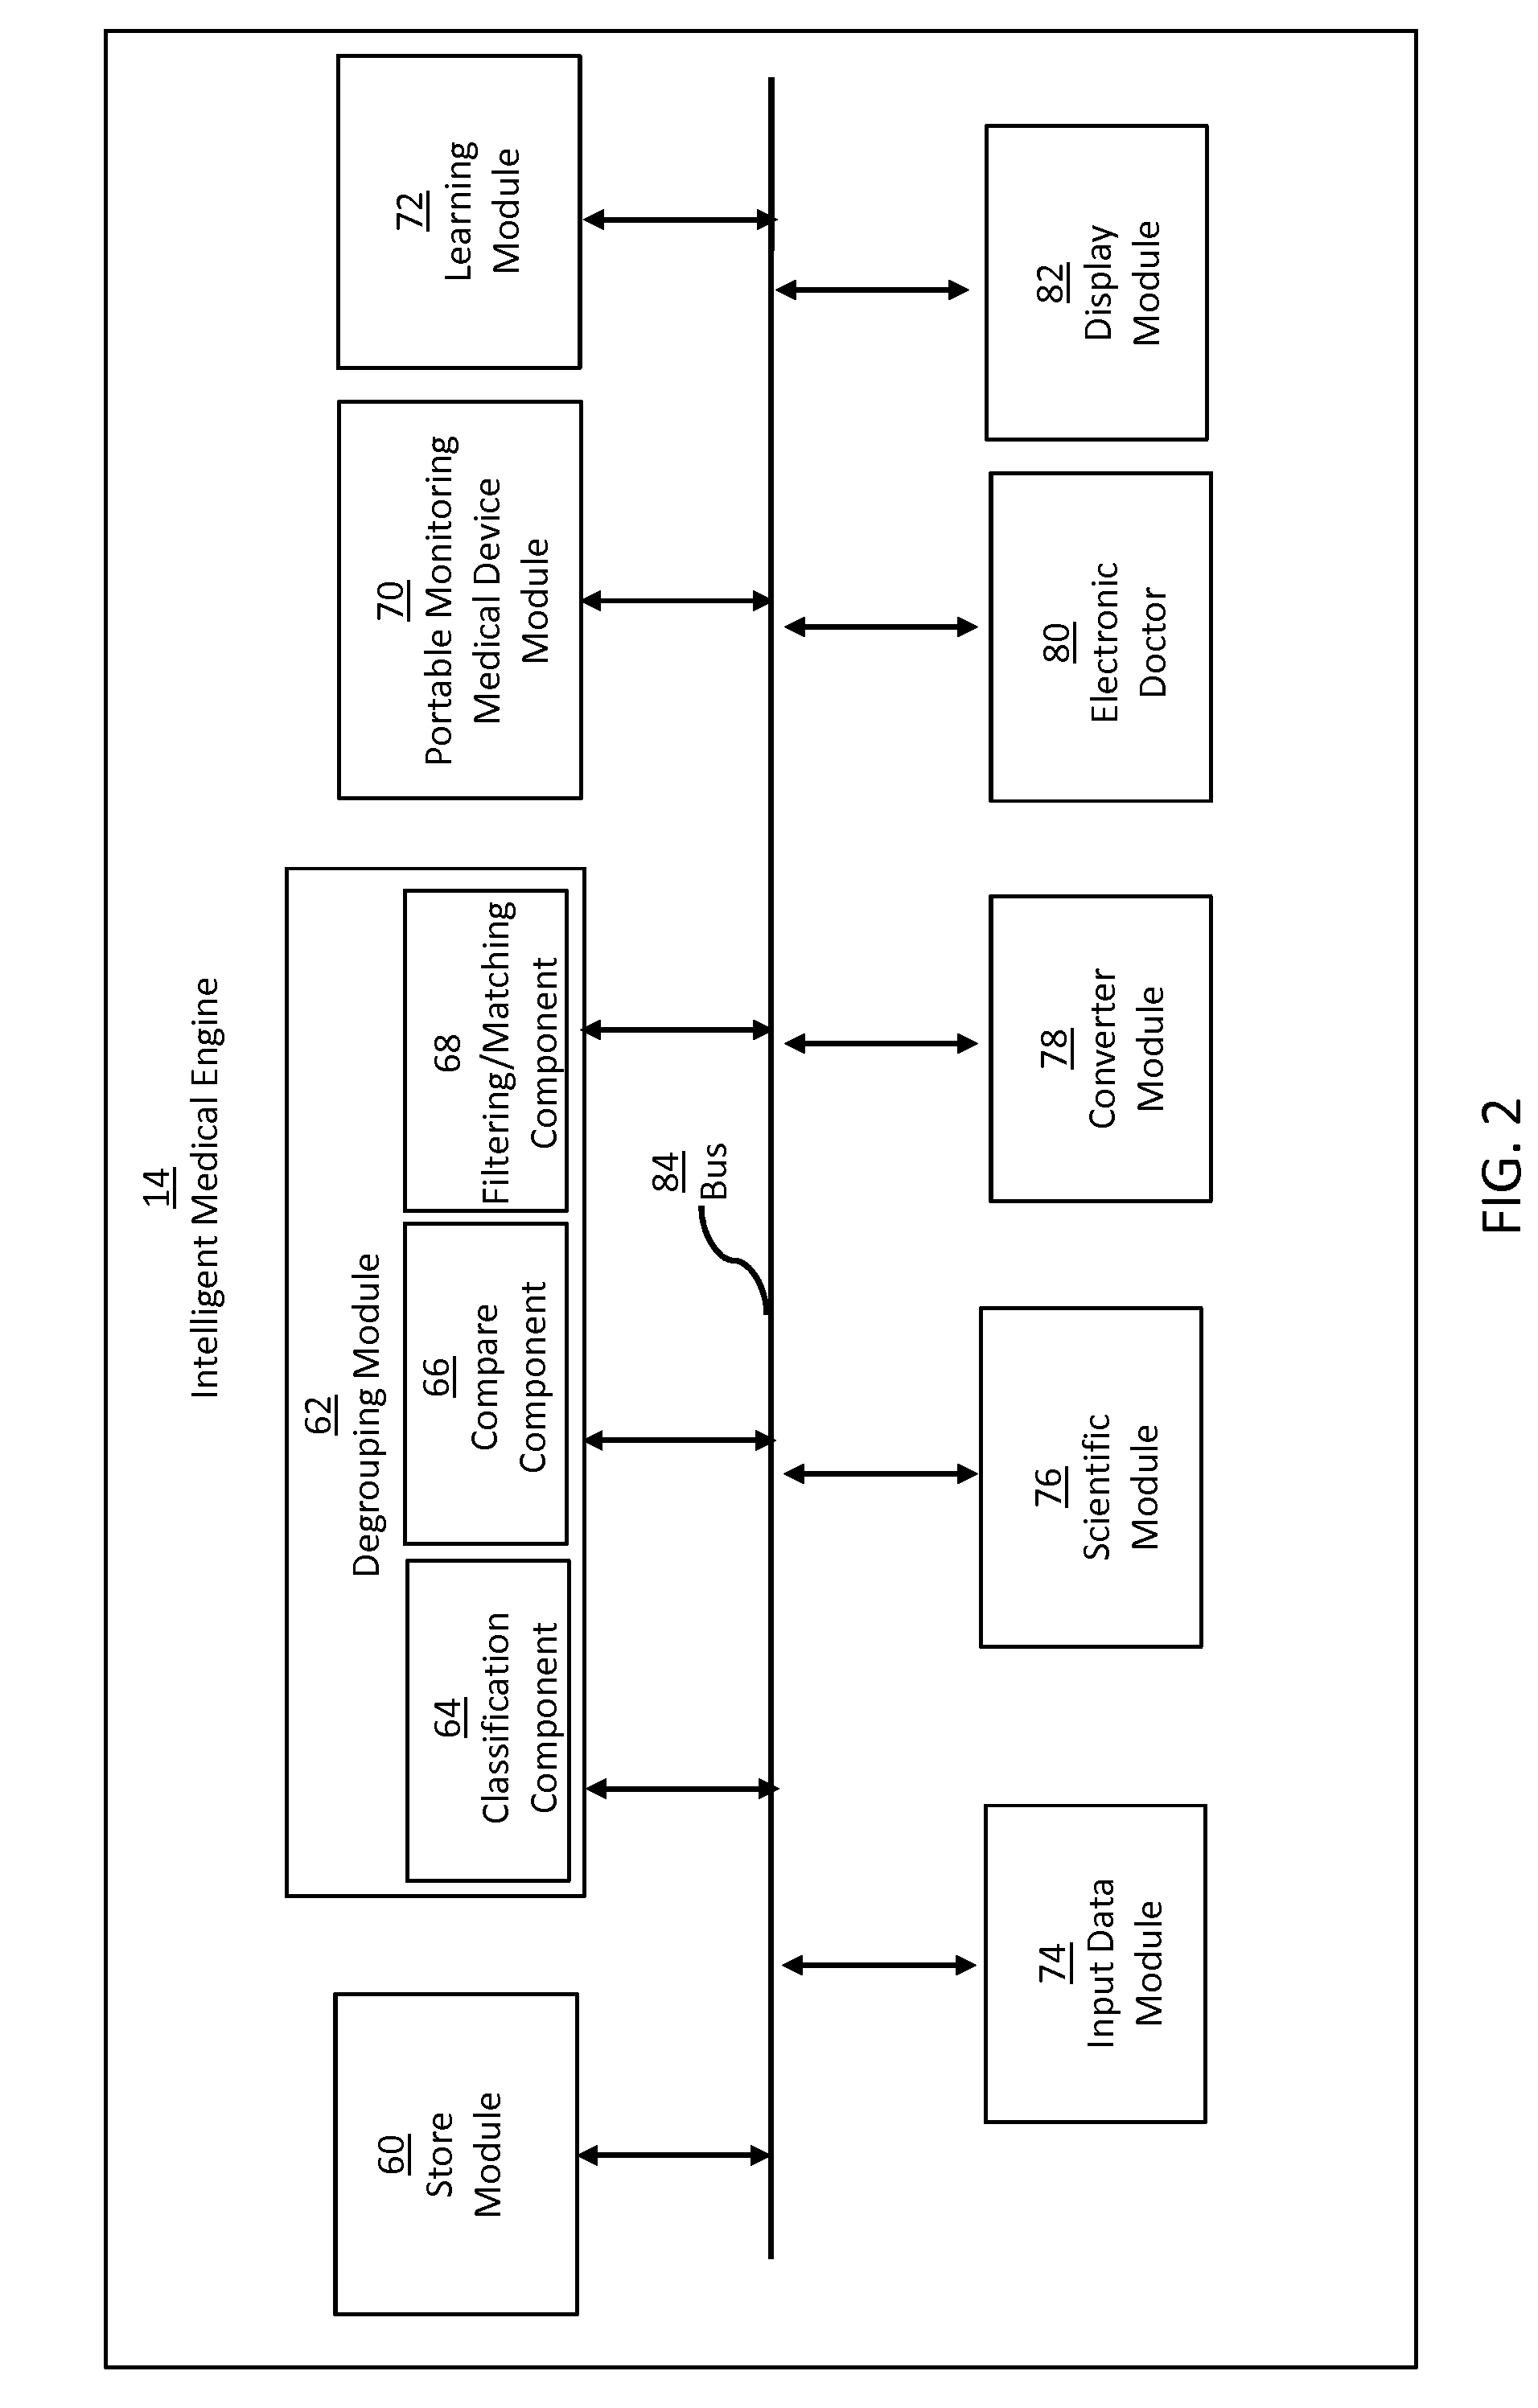 Computational medical treatment plan method and system with mass medical analysis